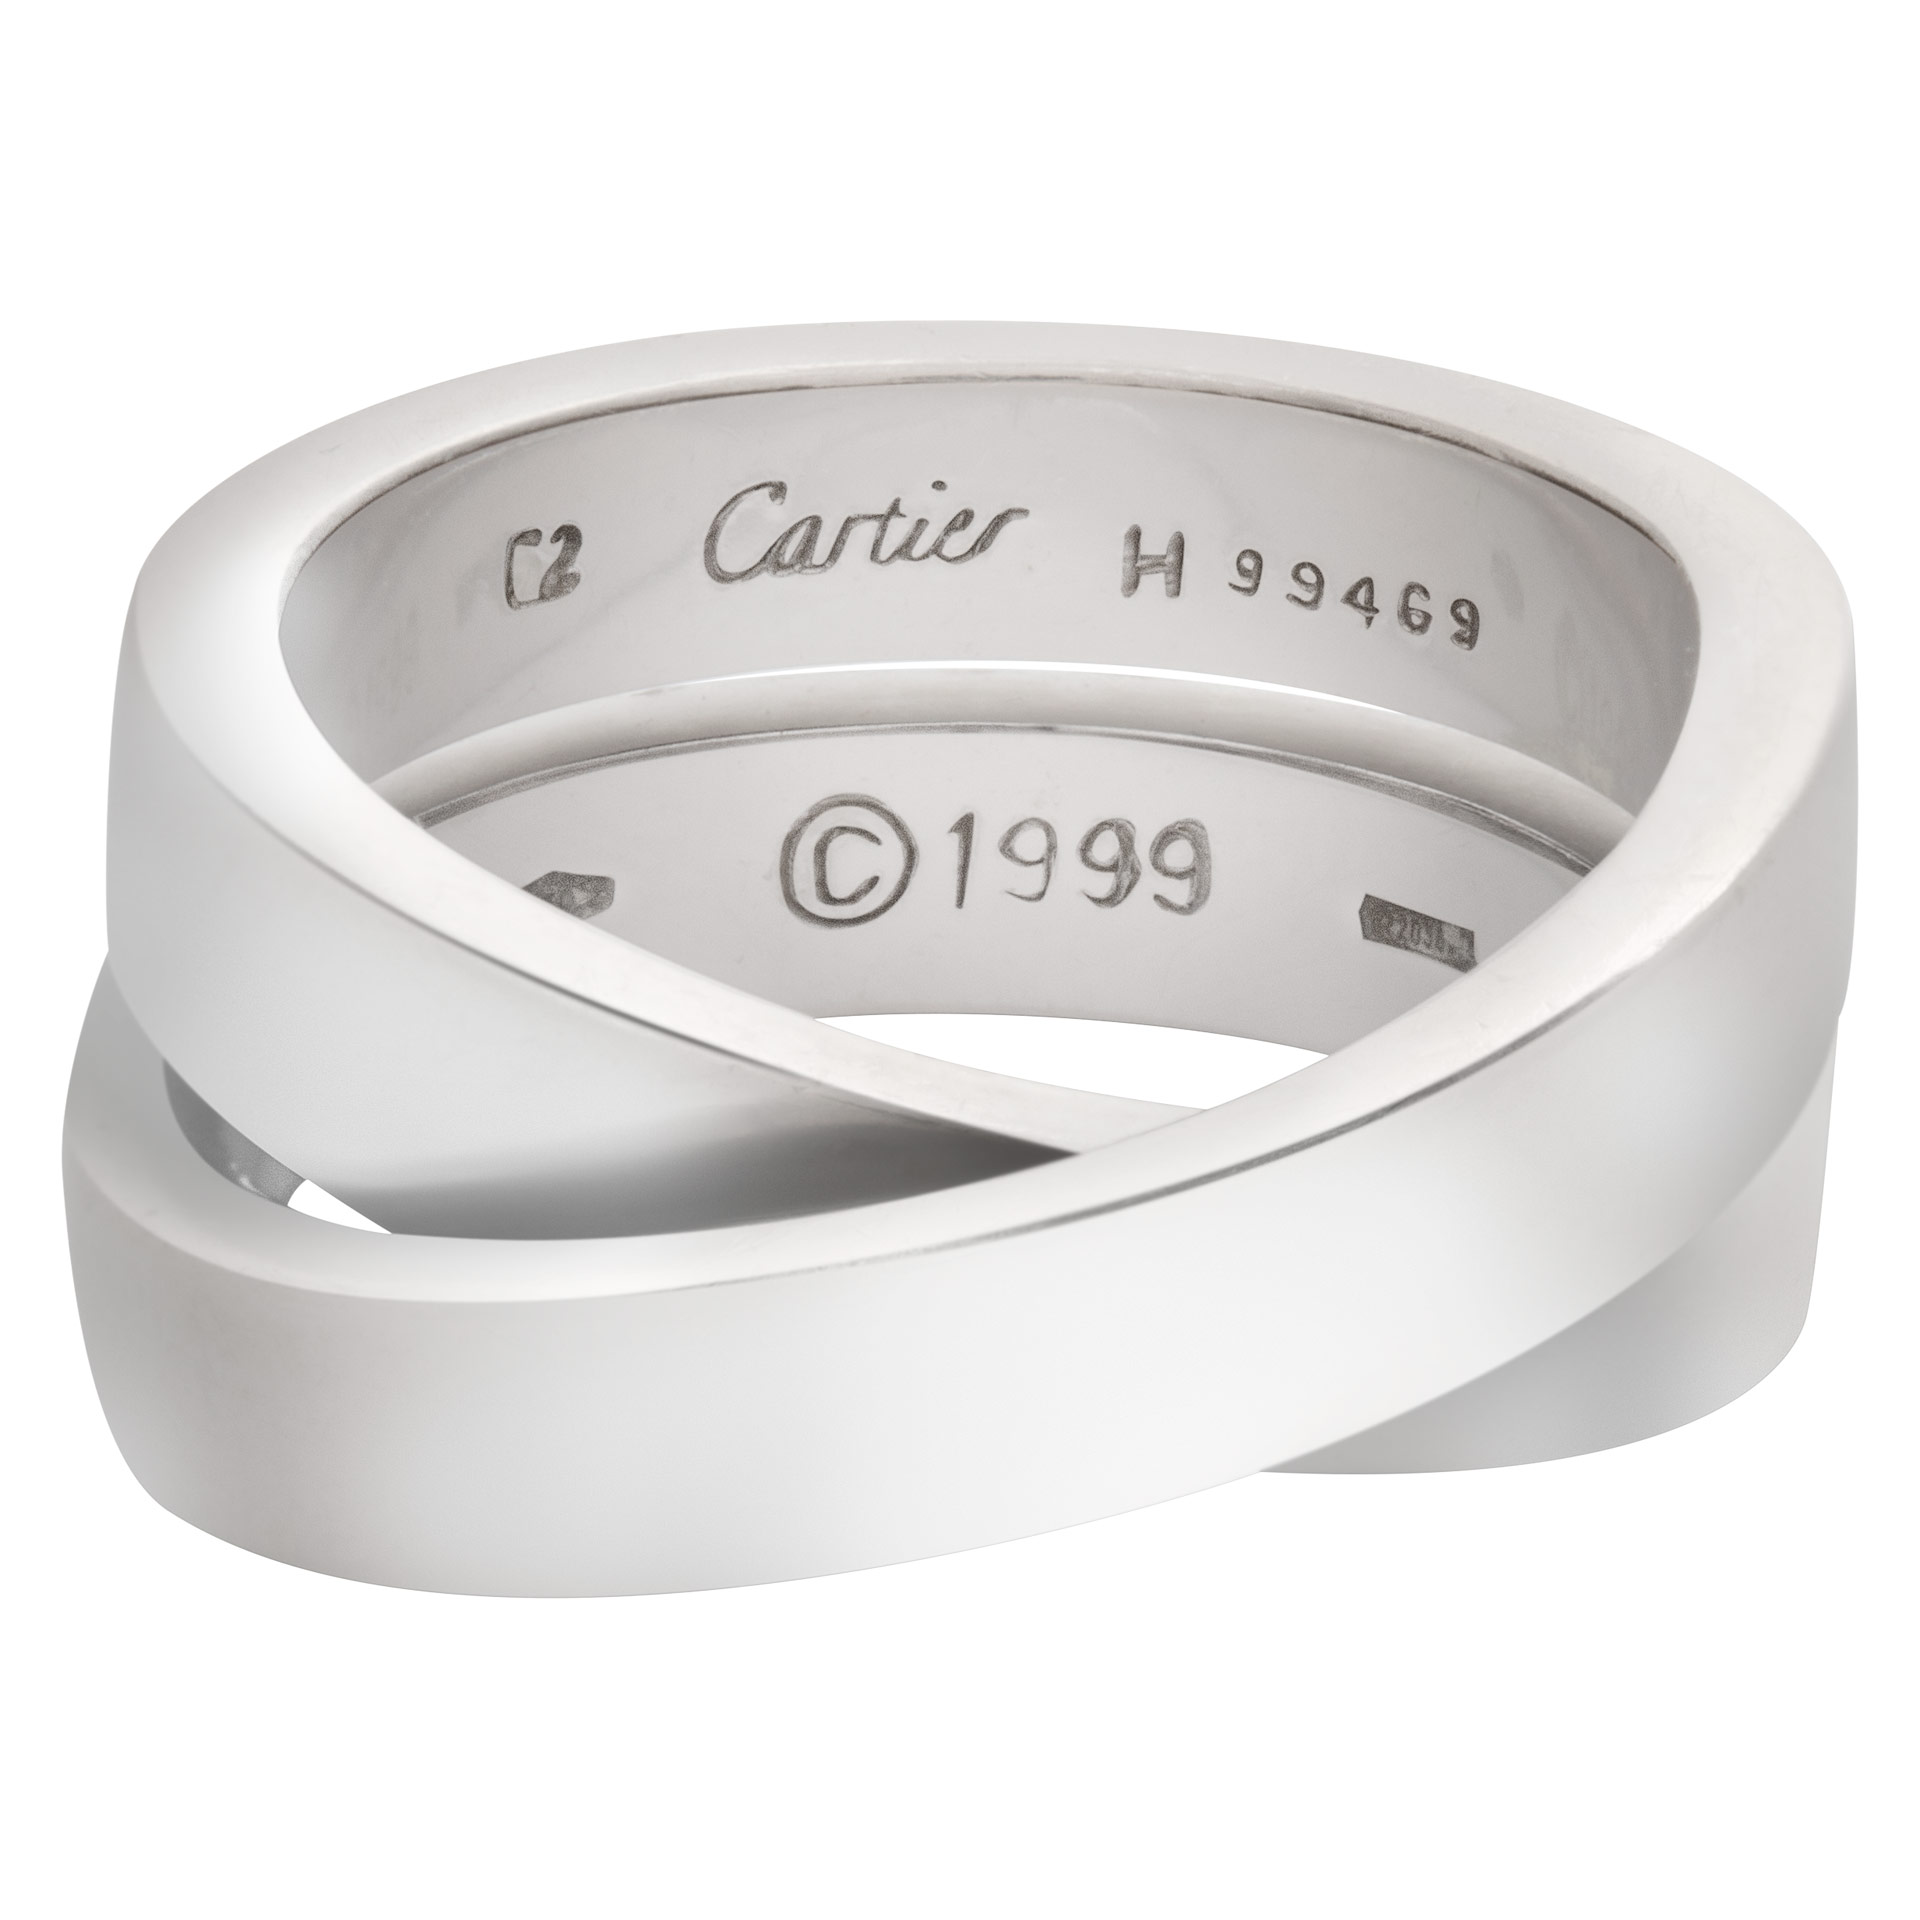 Cartier Crossover ring in 18k white gold image 1